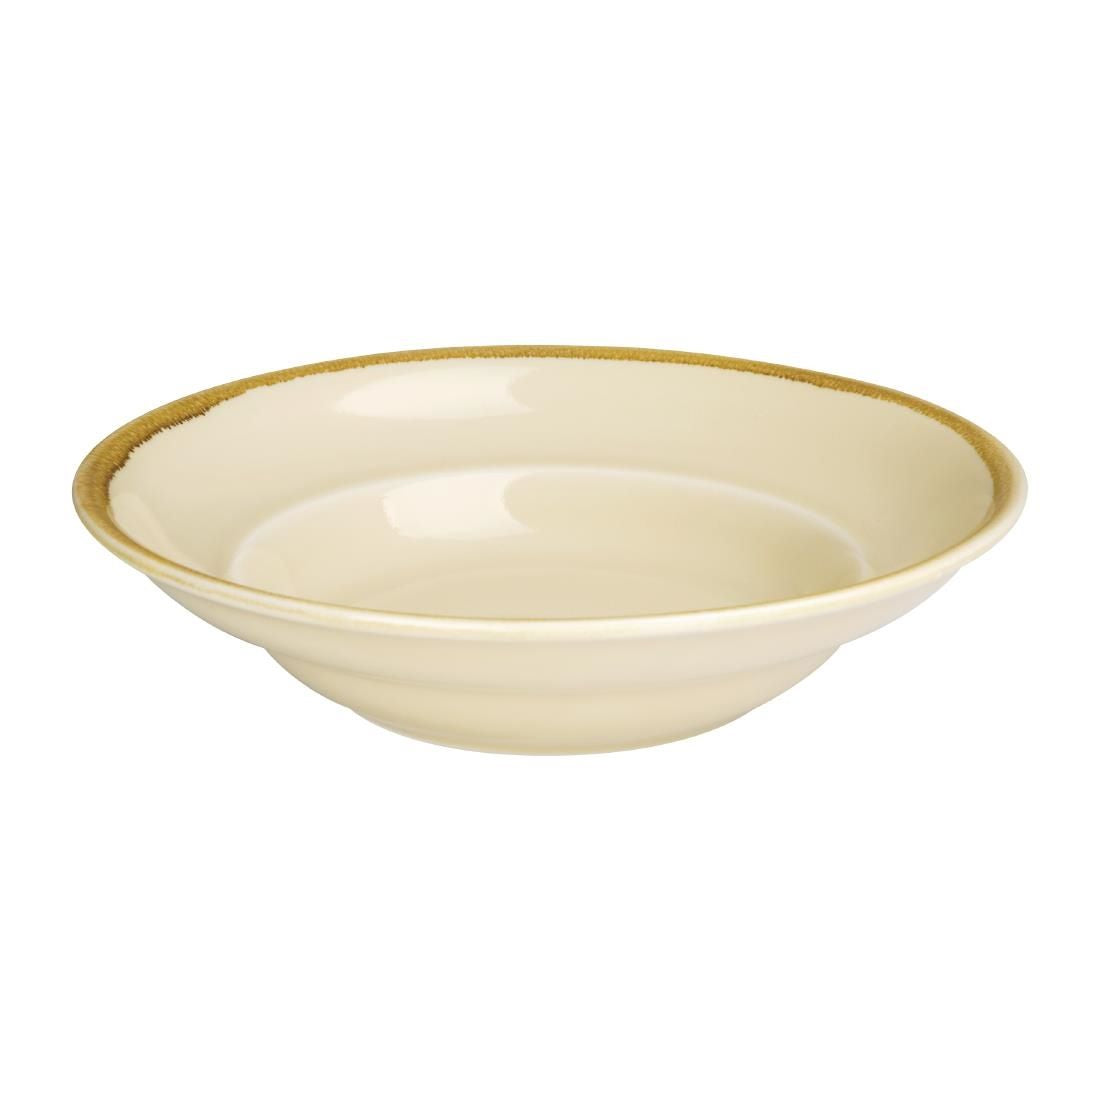 DC304 Olympia Kiln Pasta Bowls Sandstone 250mm (Pack of 4) JD Catering Equipment Solutions Ltd